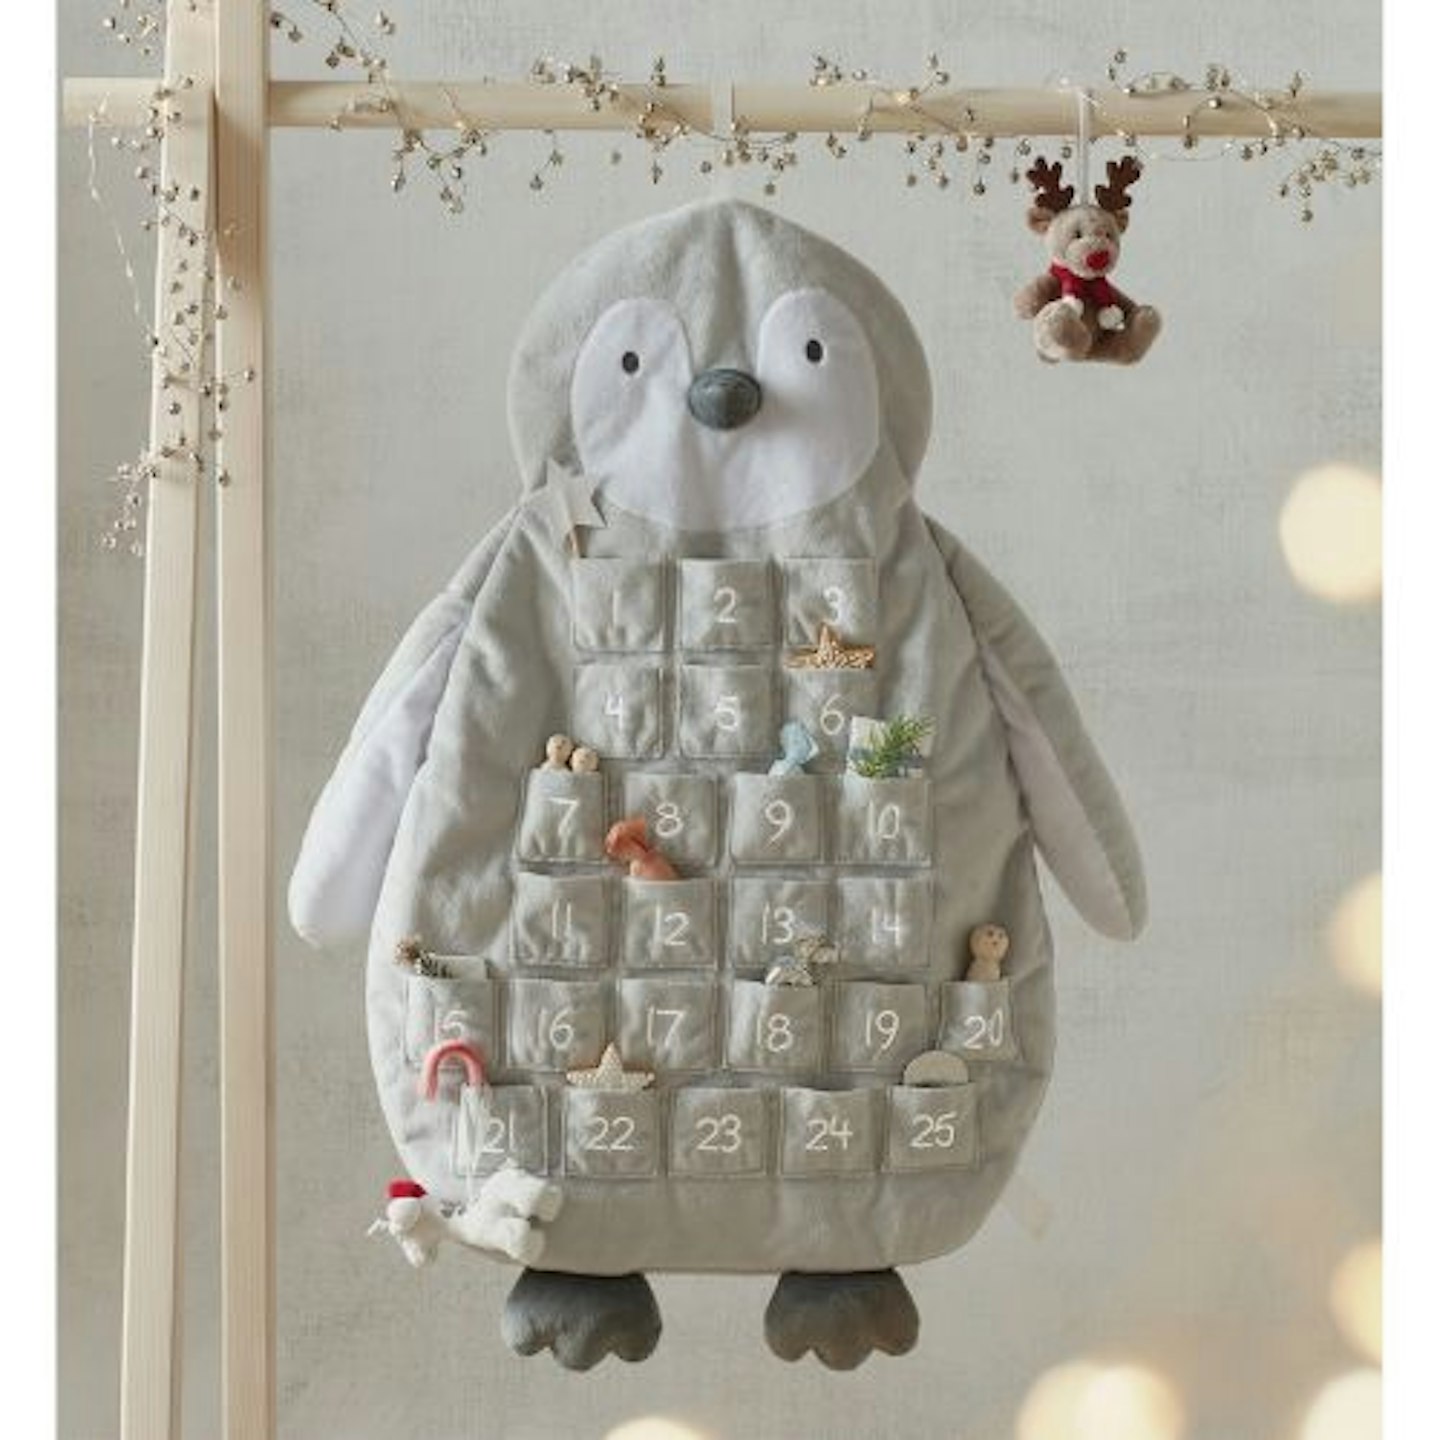 Best Advent calendars for toddlers The White Company Snowy Advent Calendar 